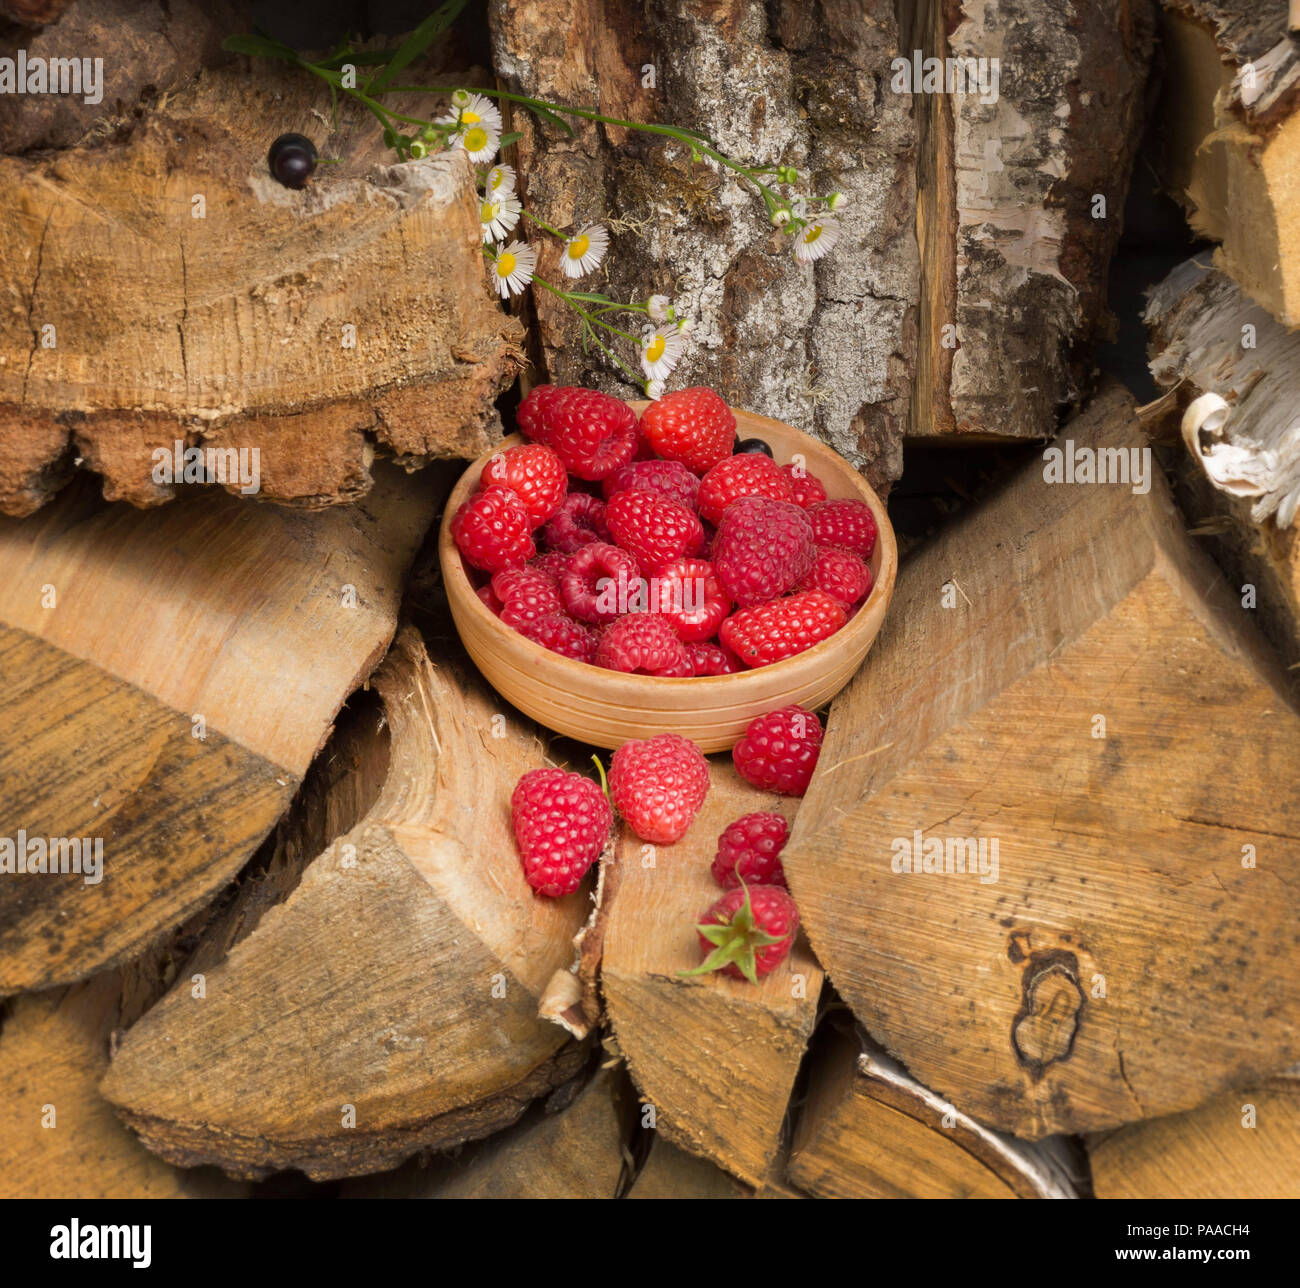 ripe raspberry in a clay bowl stands on birch firewood. A series of pictures Stock Photo